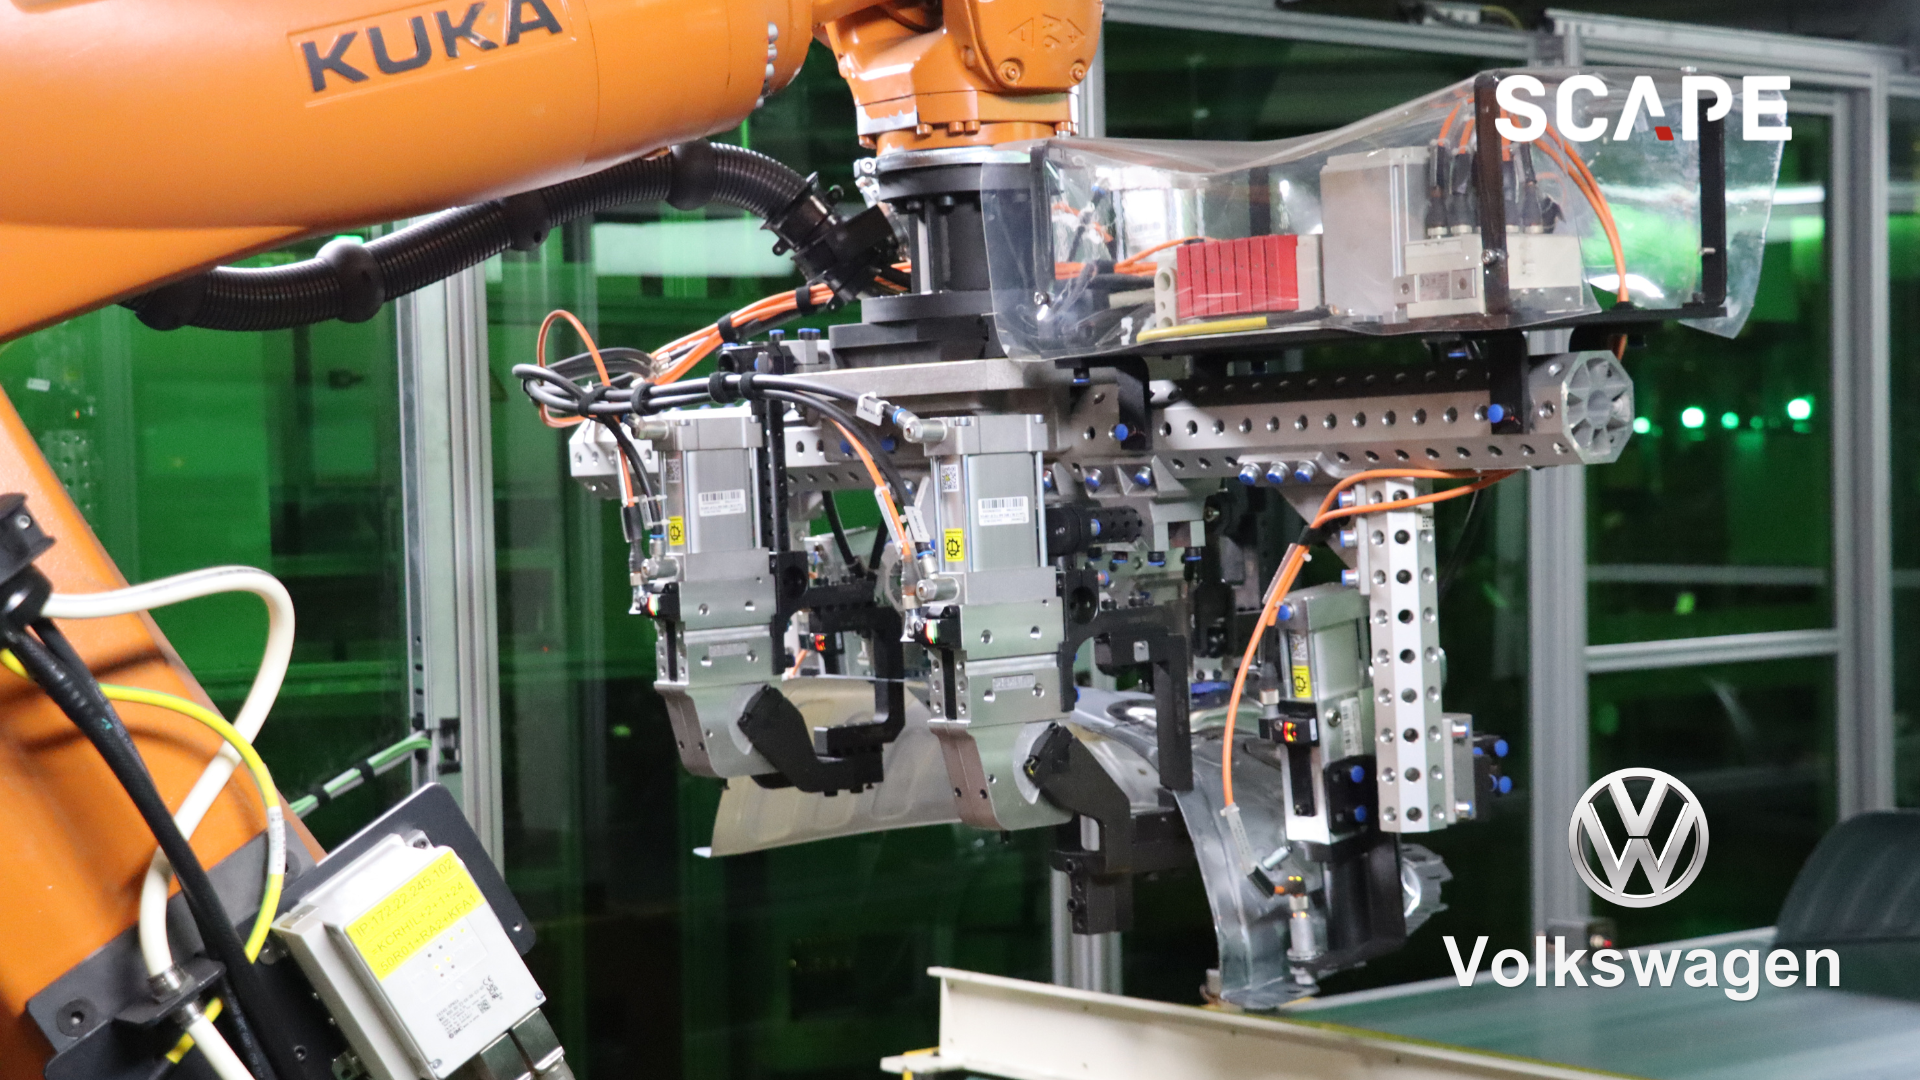 SCAPE Bin-Picking solution integrated on a KUKA industrial robot for automating the task of handling wheelhouses at Volkswagen